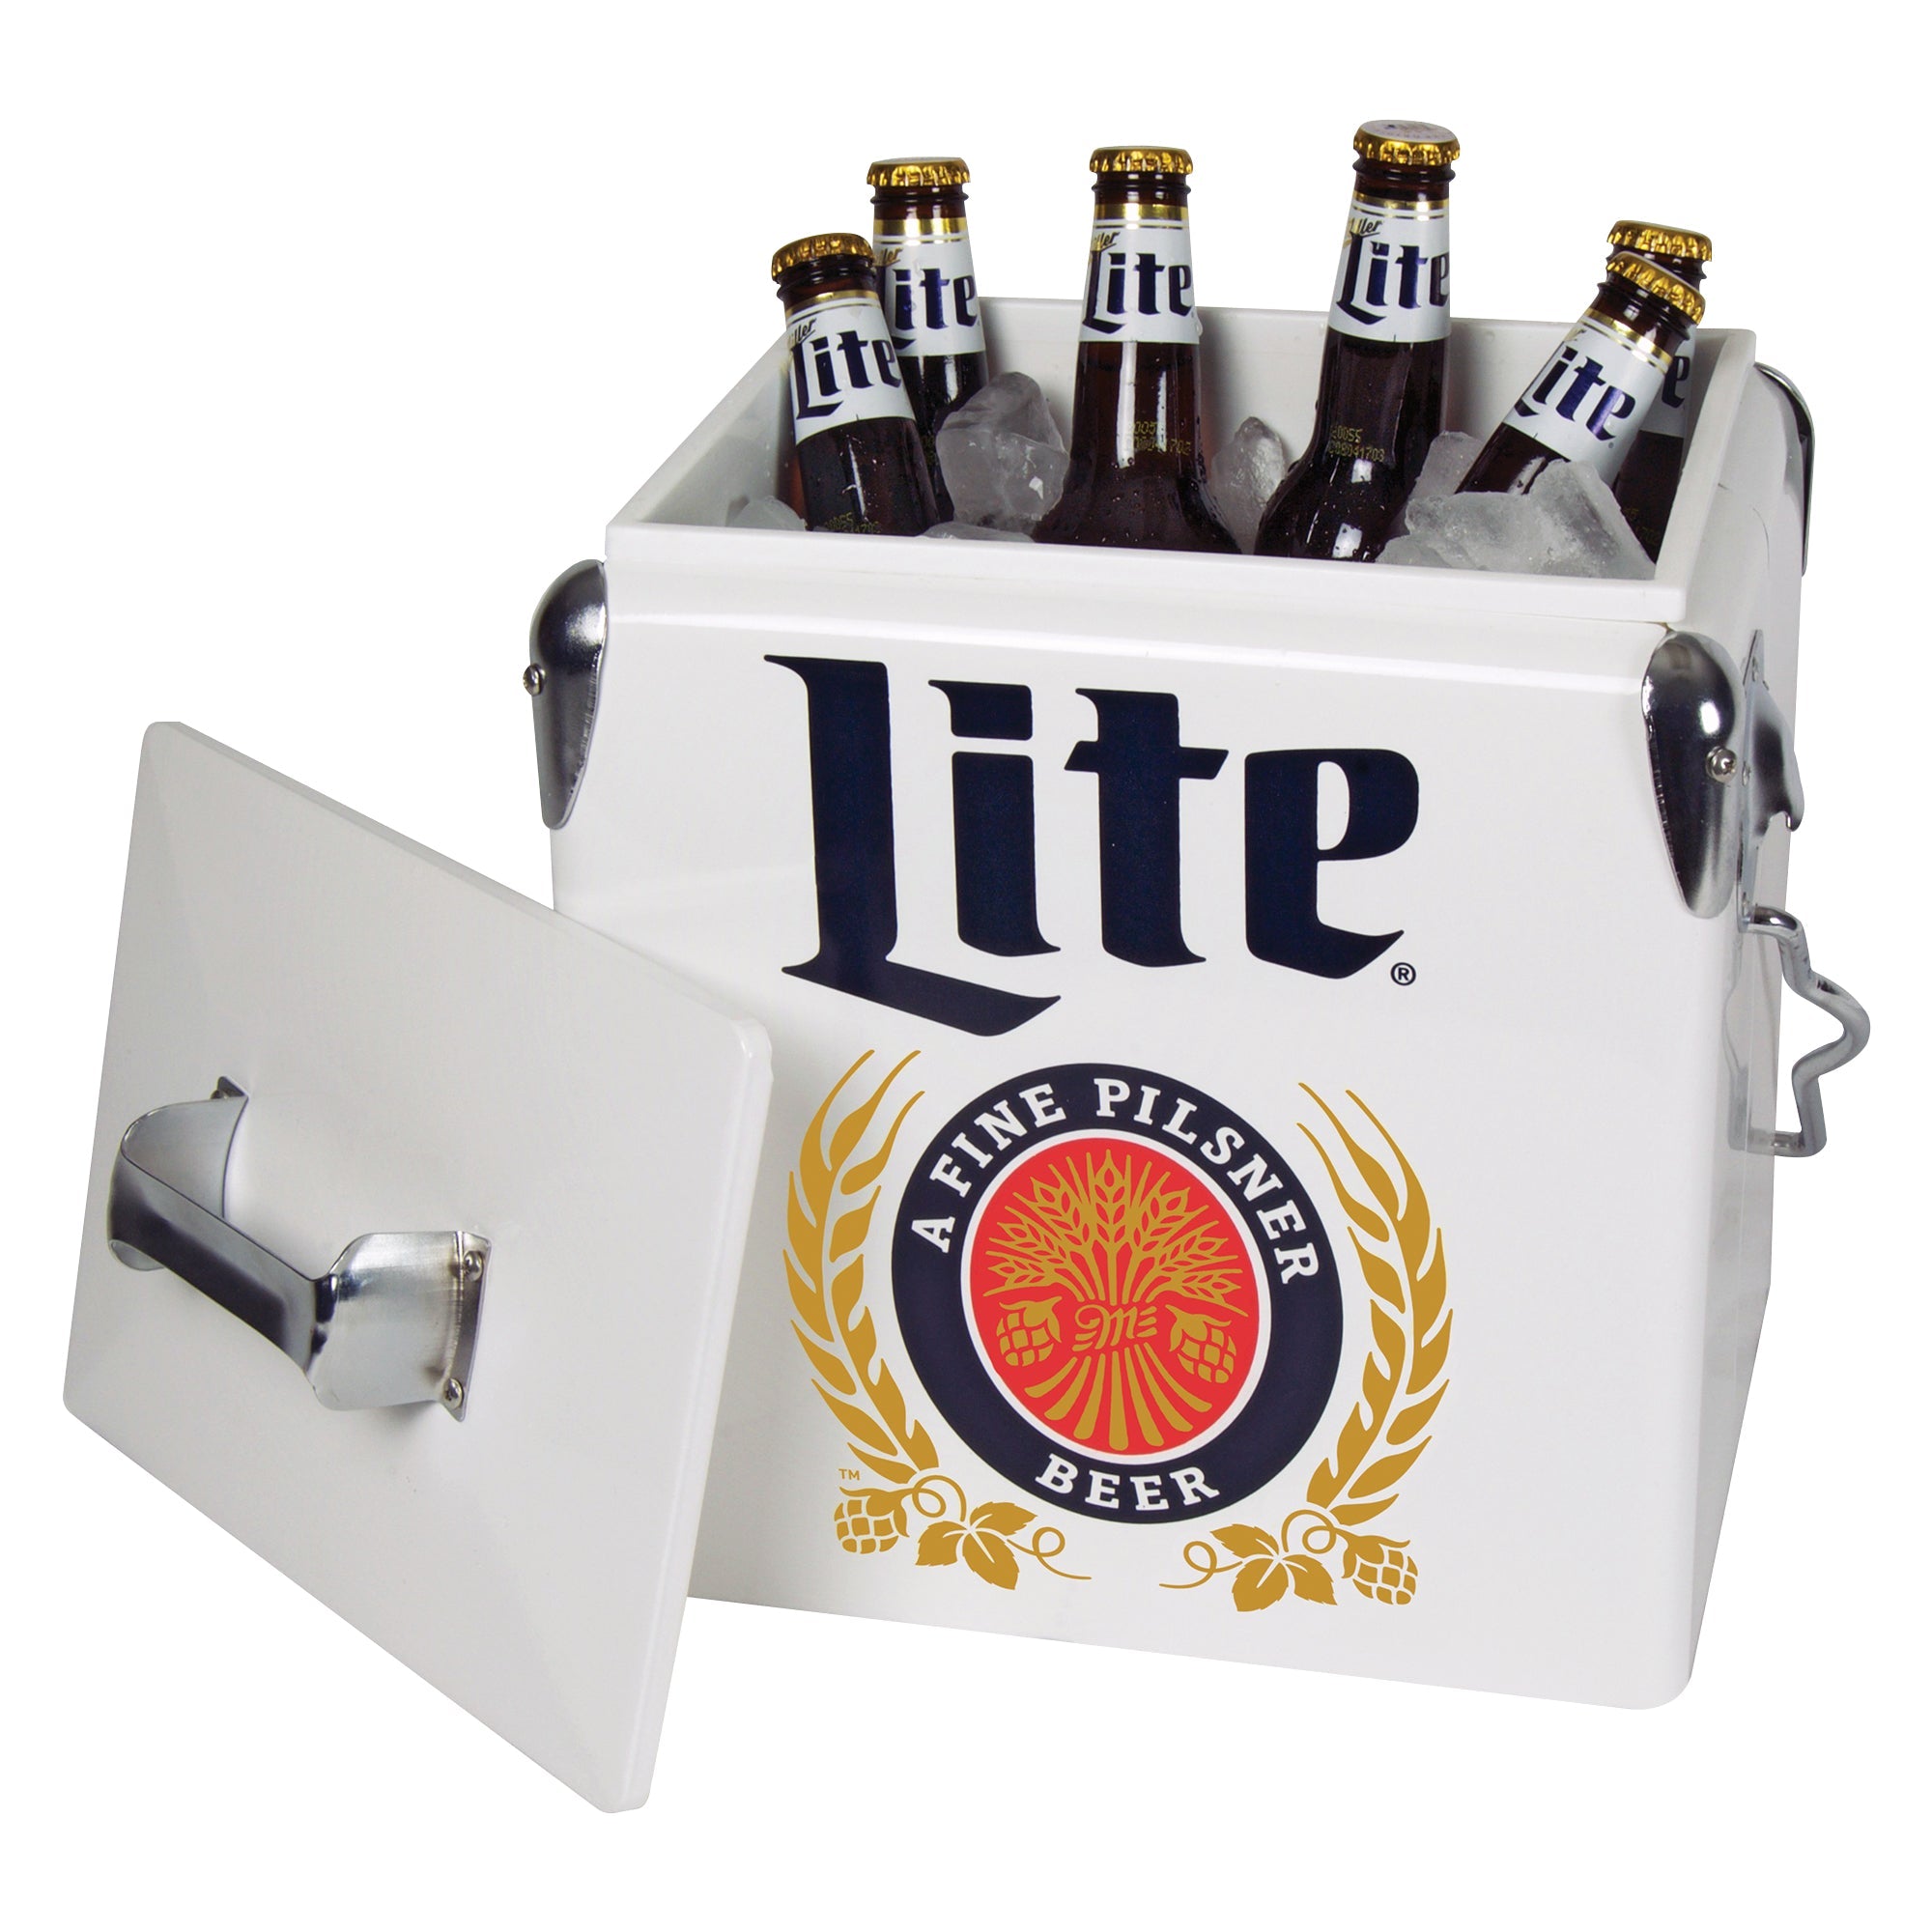 Product shot of Miller Lite retro ice chest, open with ice and bottles of Miller Lite beer inside and the lid leaning against it, on a white background